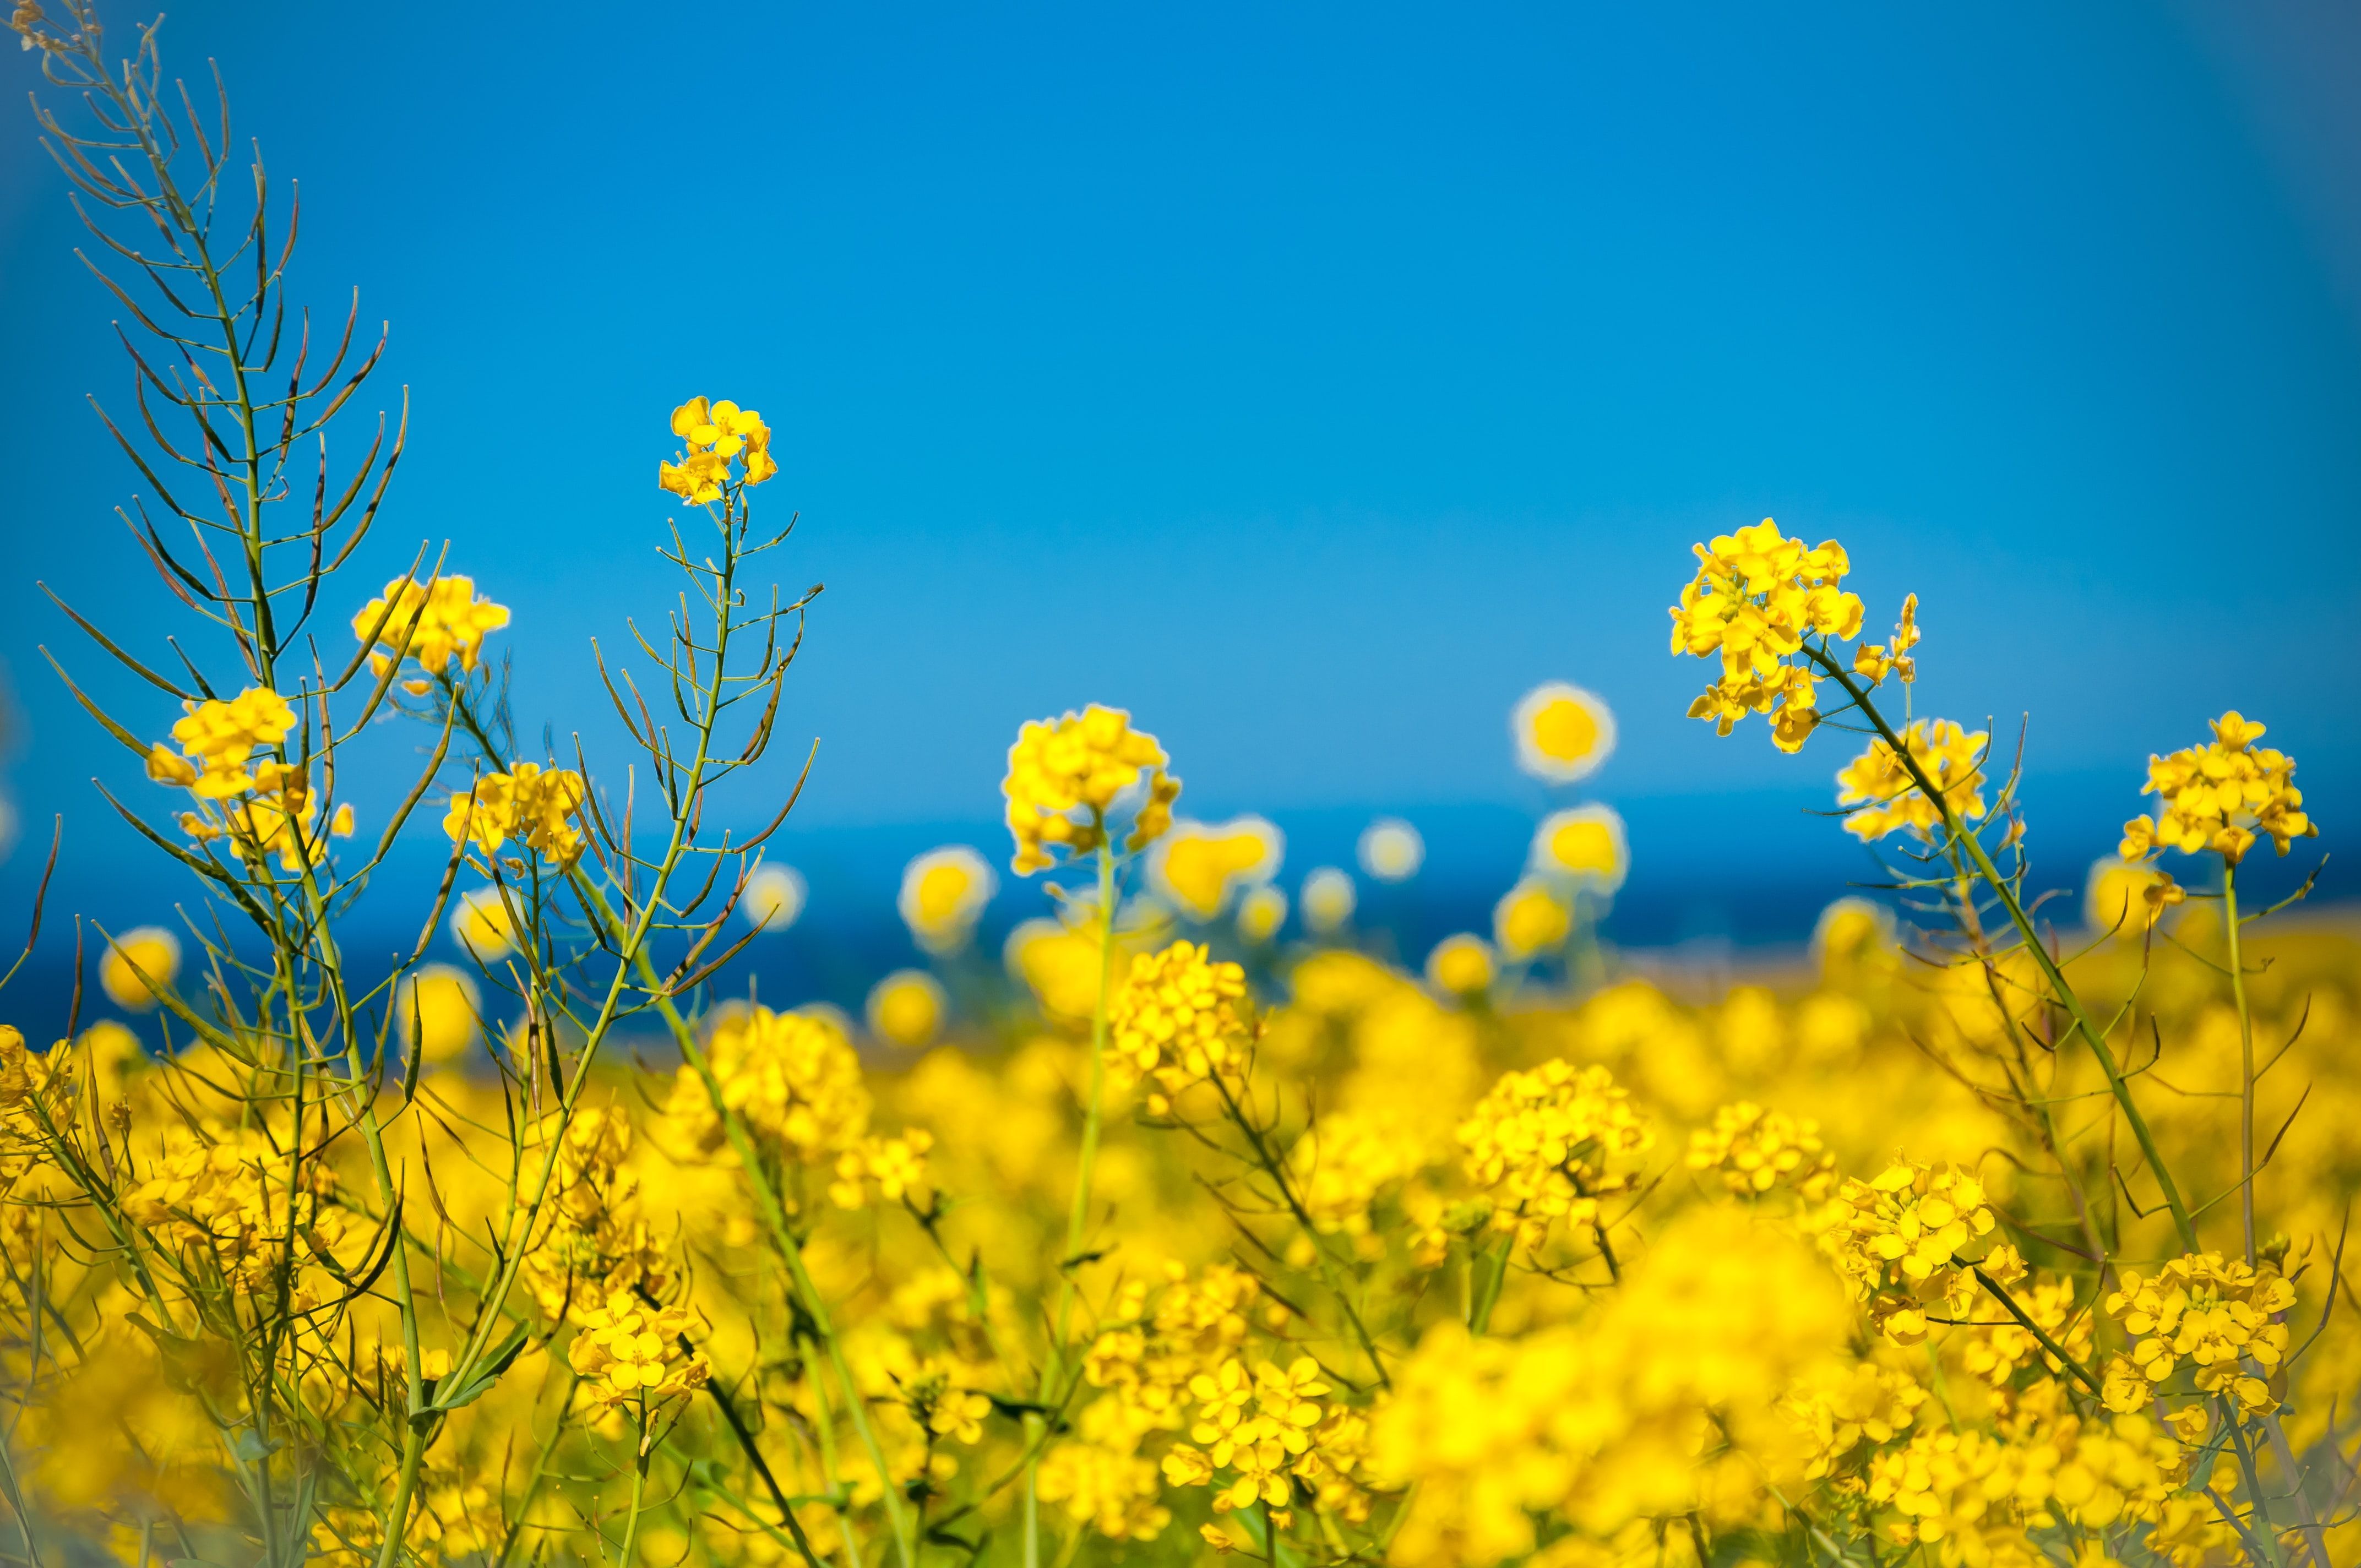 A close-up photo of a bounty of bright yellow wildflowers against a blue sky.